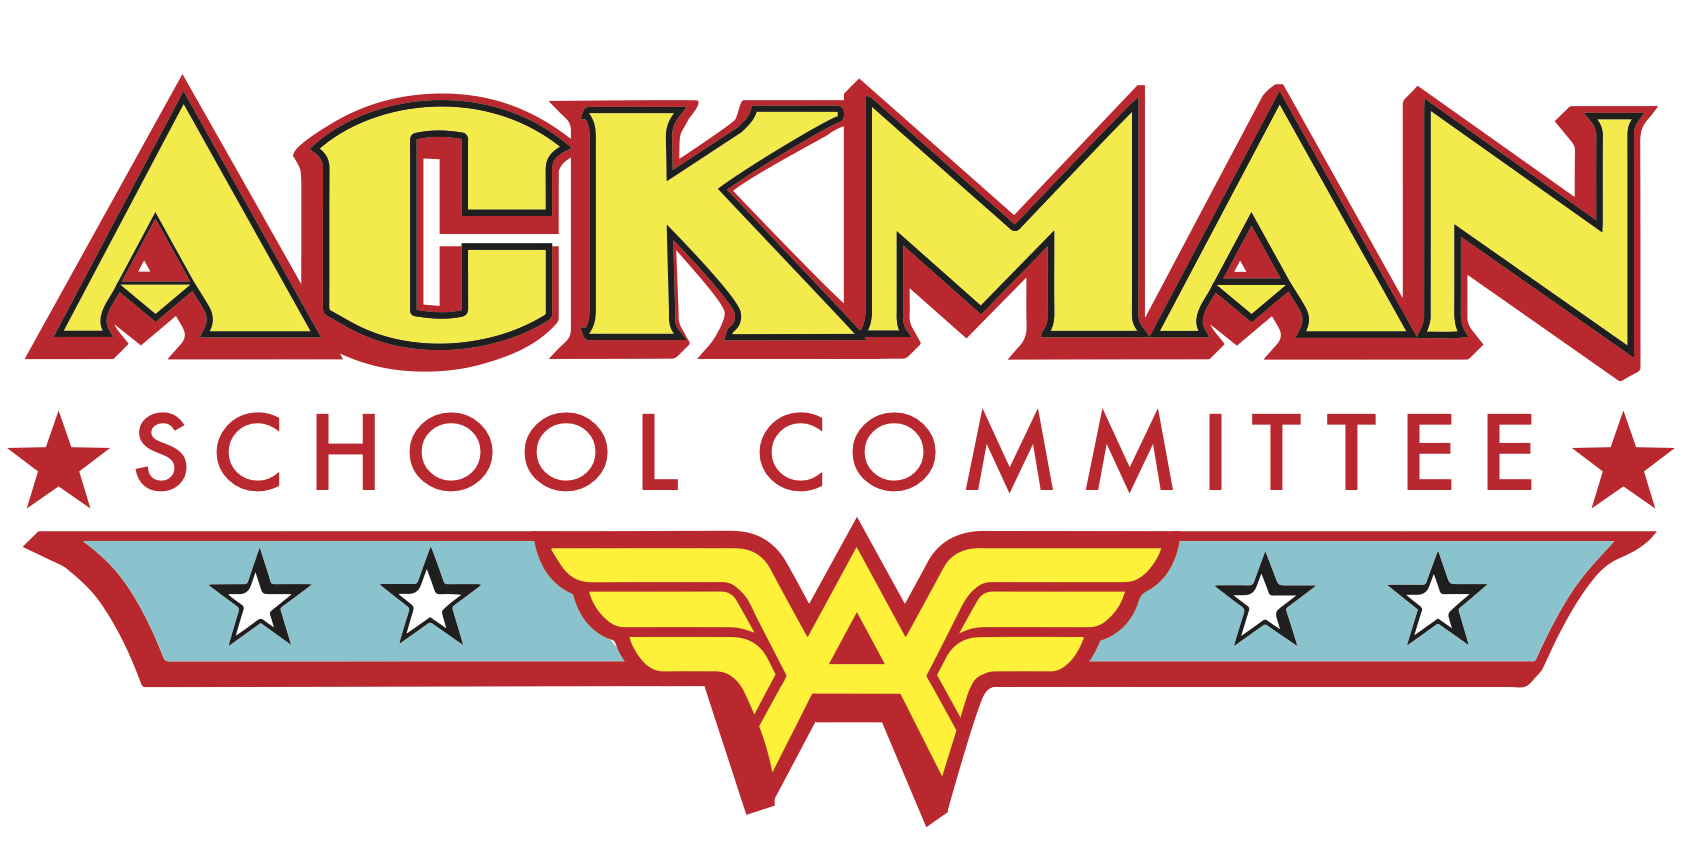 The Committee to Elect Emily Ackman logo